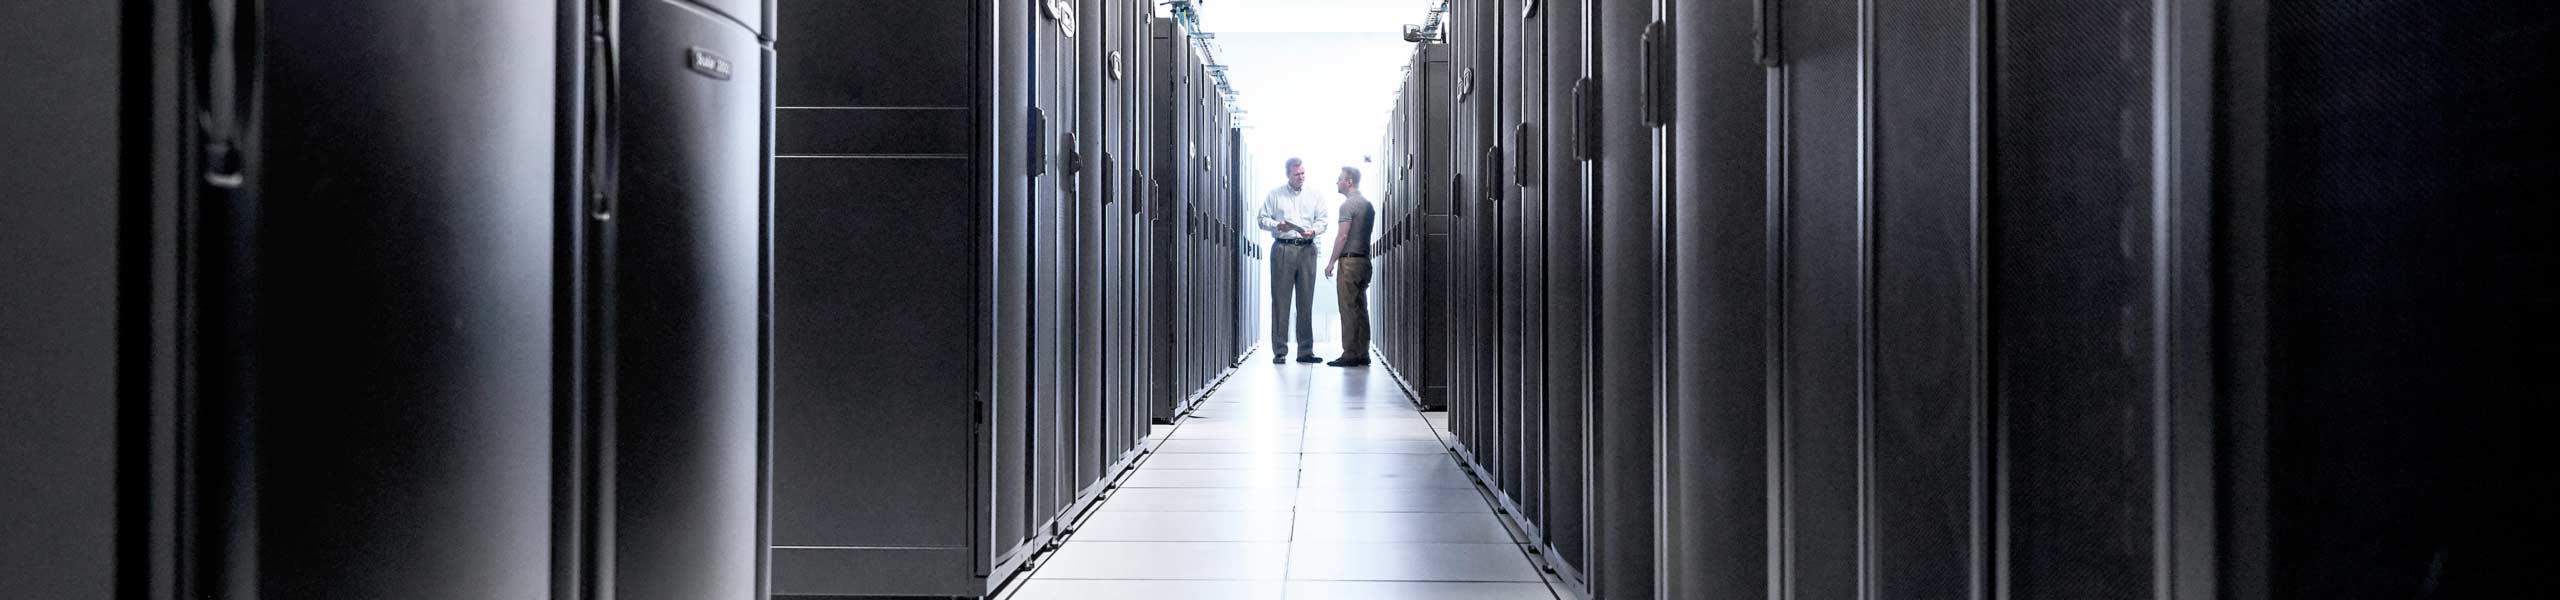 Two men standing in a row of data centers, data center management, IT business.